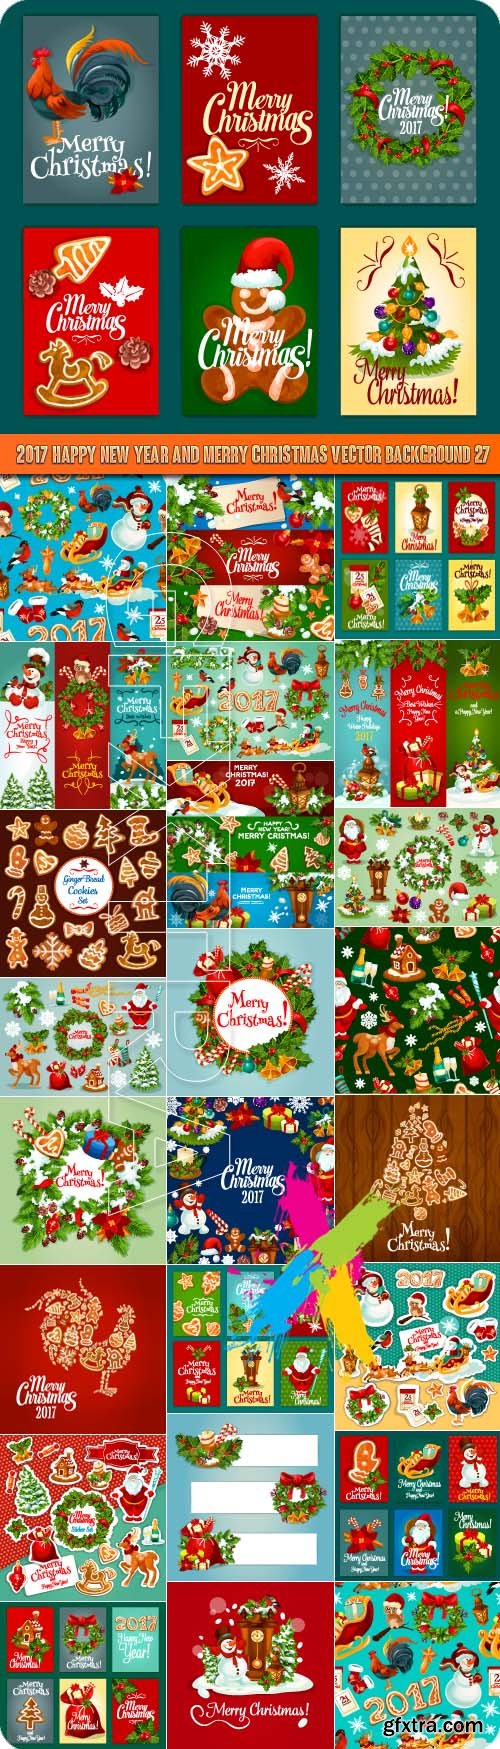 2017 Happy New Year and Merry Christmas vector background 27